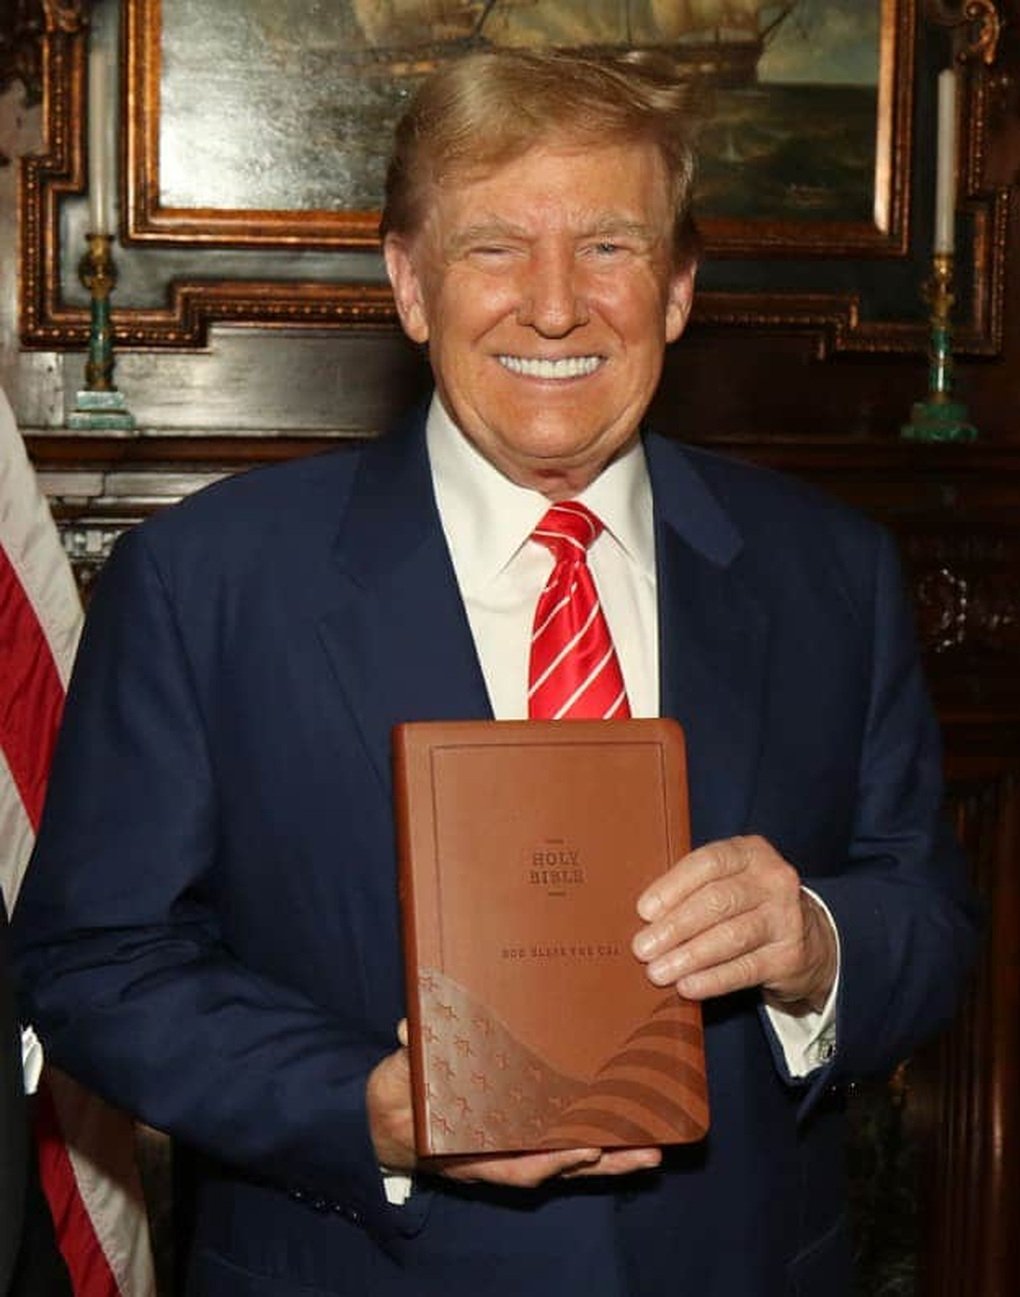 Mr. Trump caused controversy for selling the Bible `God Bless America` 0